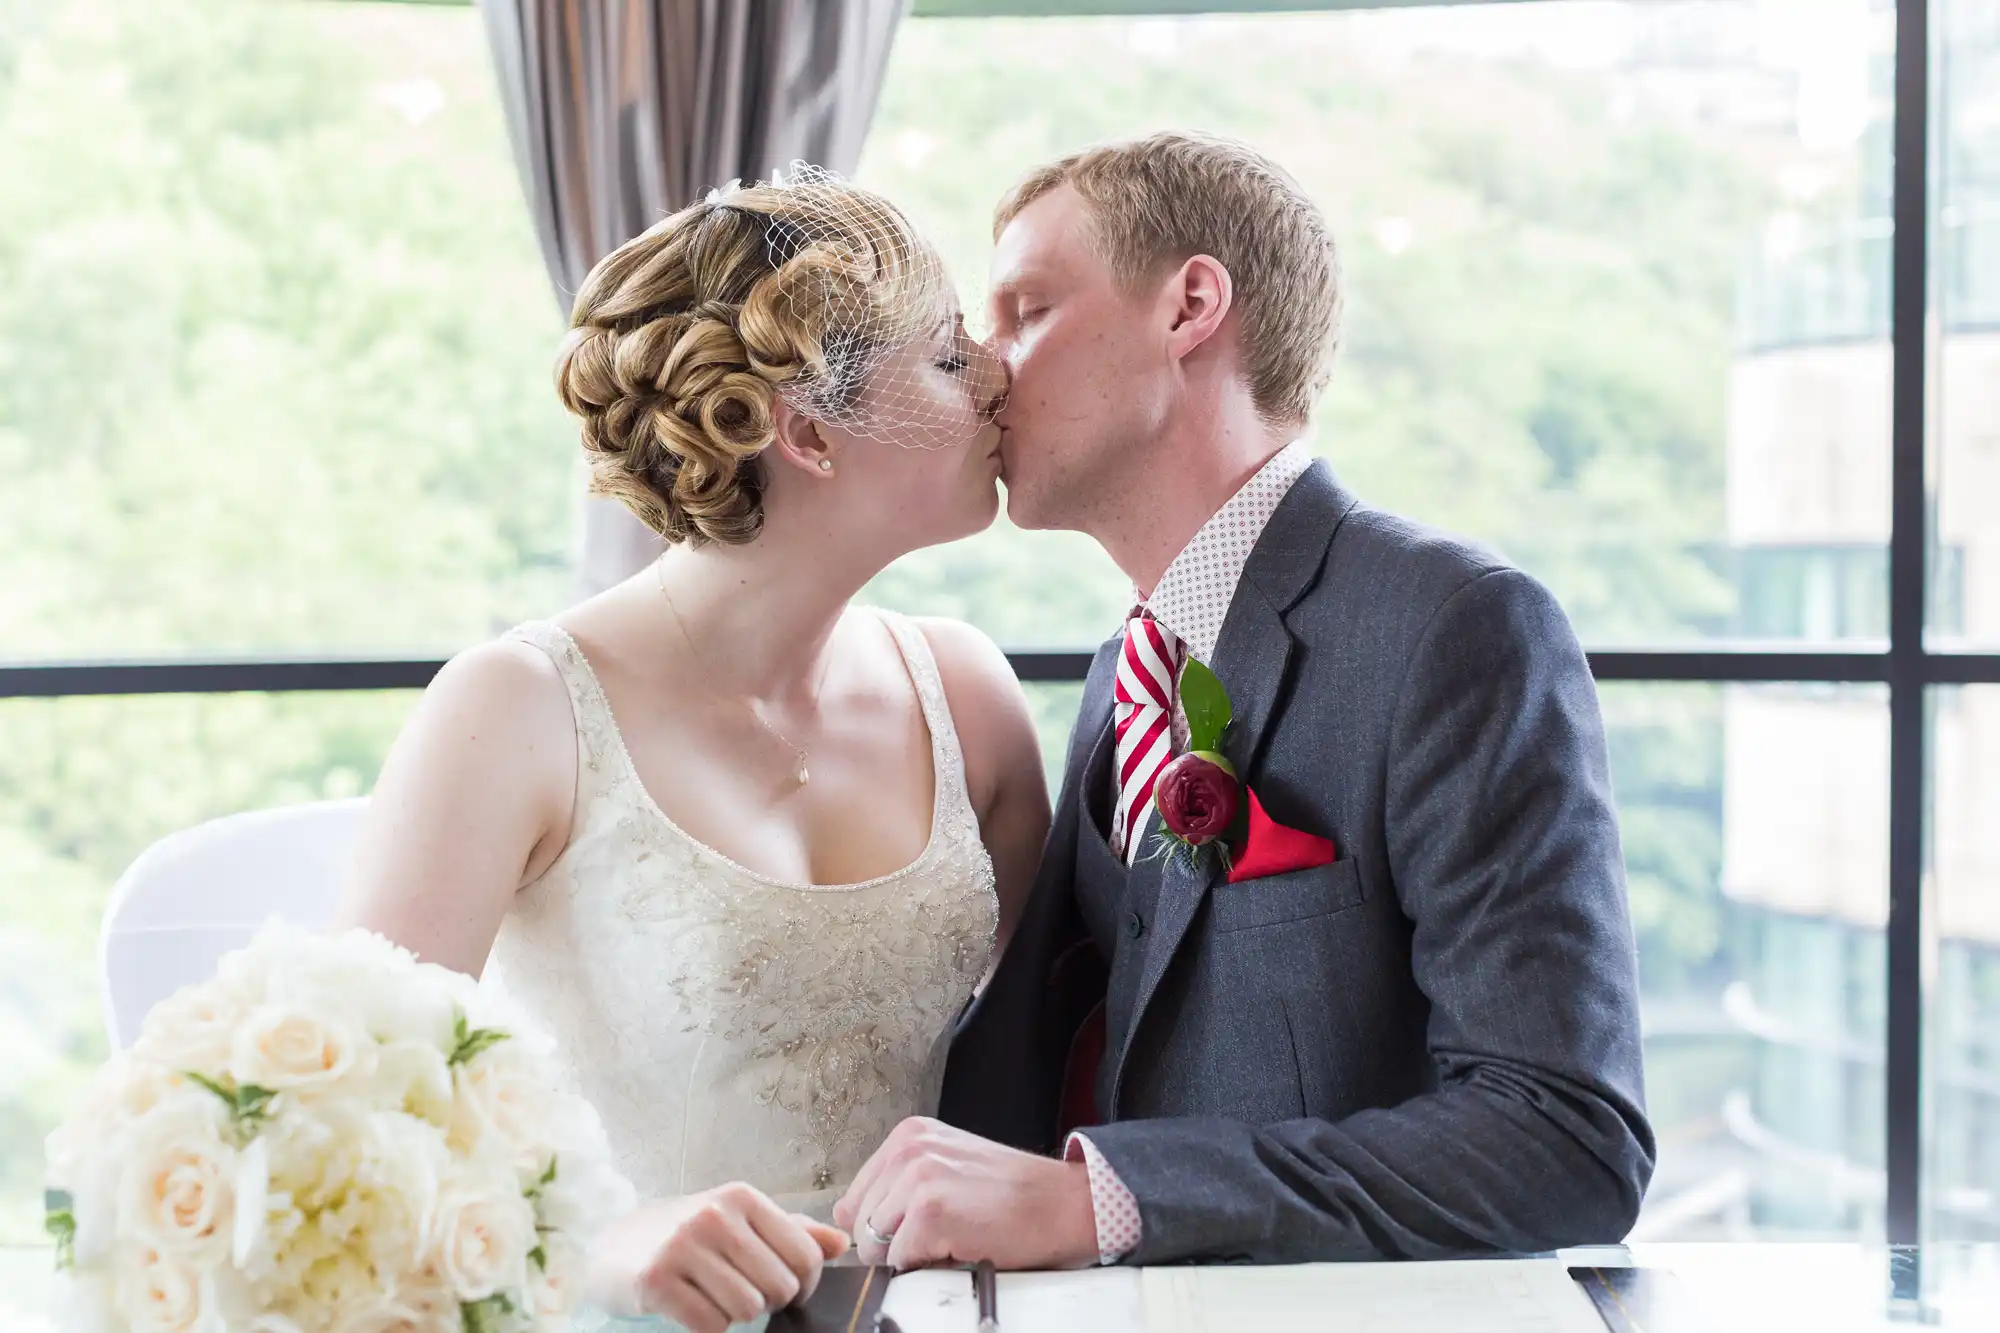 A bride and groom kissing at a table with a bouquet of white roses, in a room with large windows overlooking greenery.